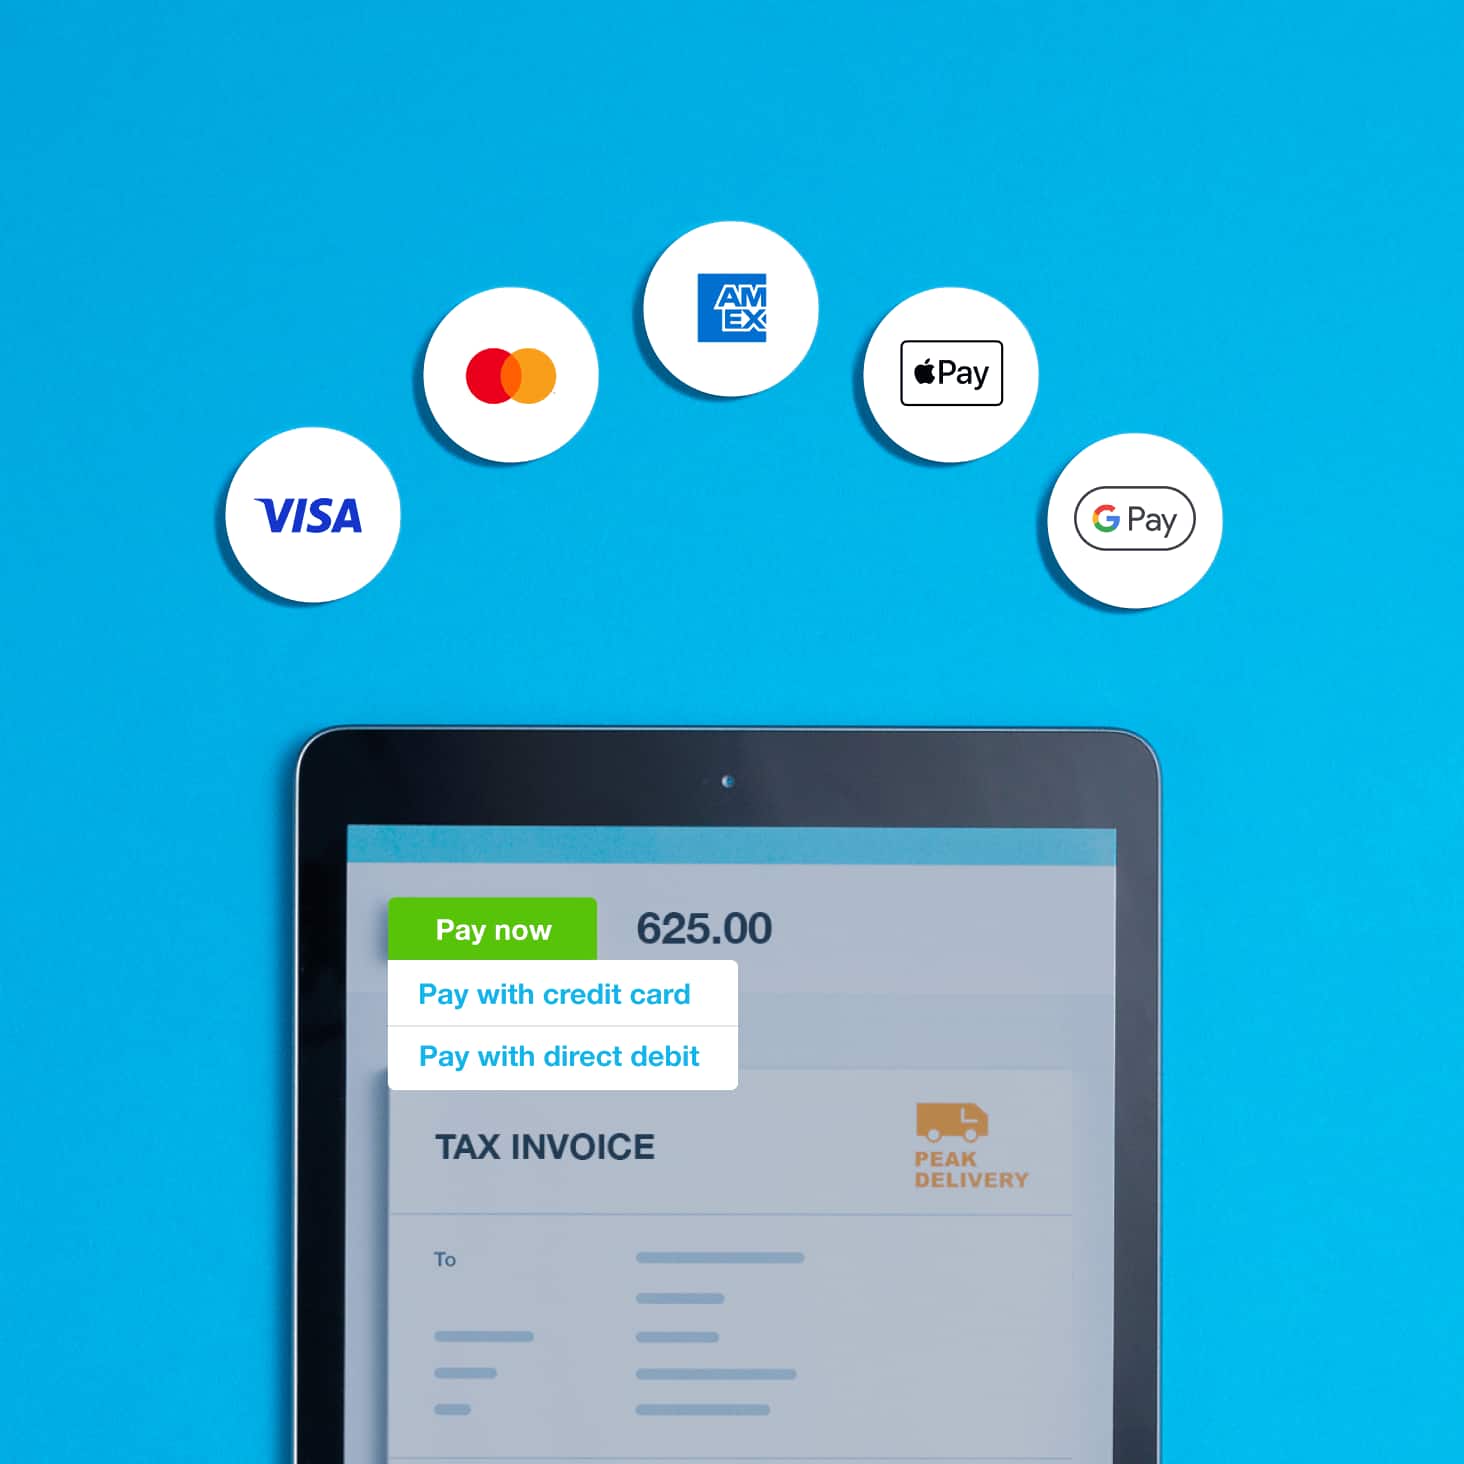 An invoice with a pay now button and the logos of Visa, MasterCard, American Express and Google Pay shown as payment options.